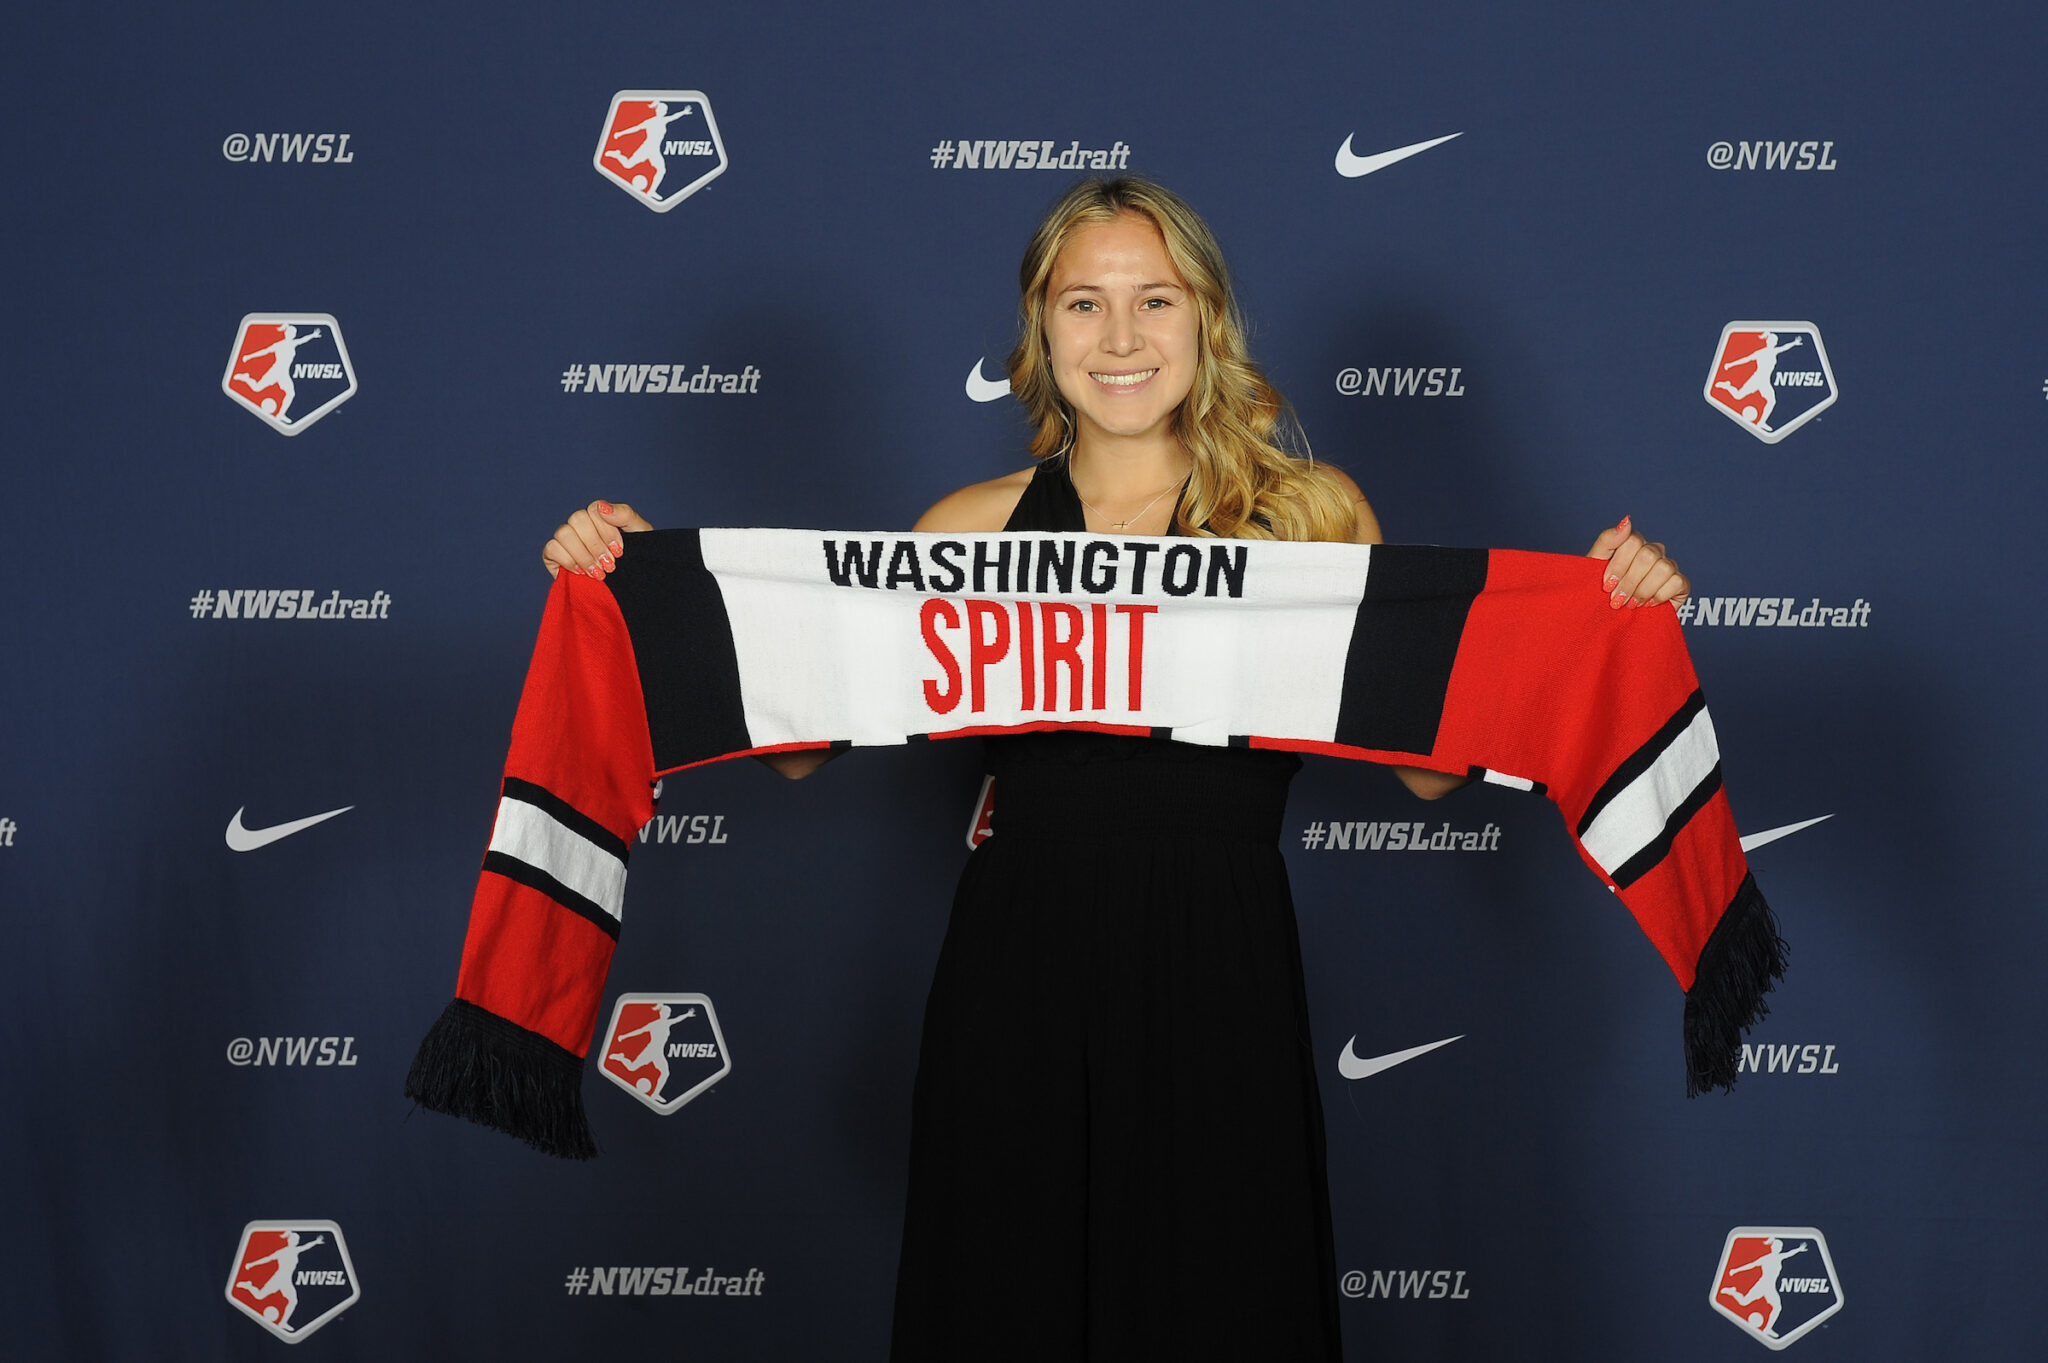 Washington Spirit select Ashley Sanchez fourth overall in 2020 NWSL Draft Featured Image